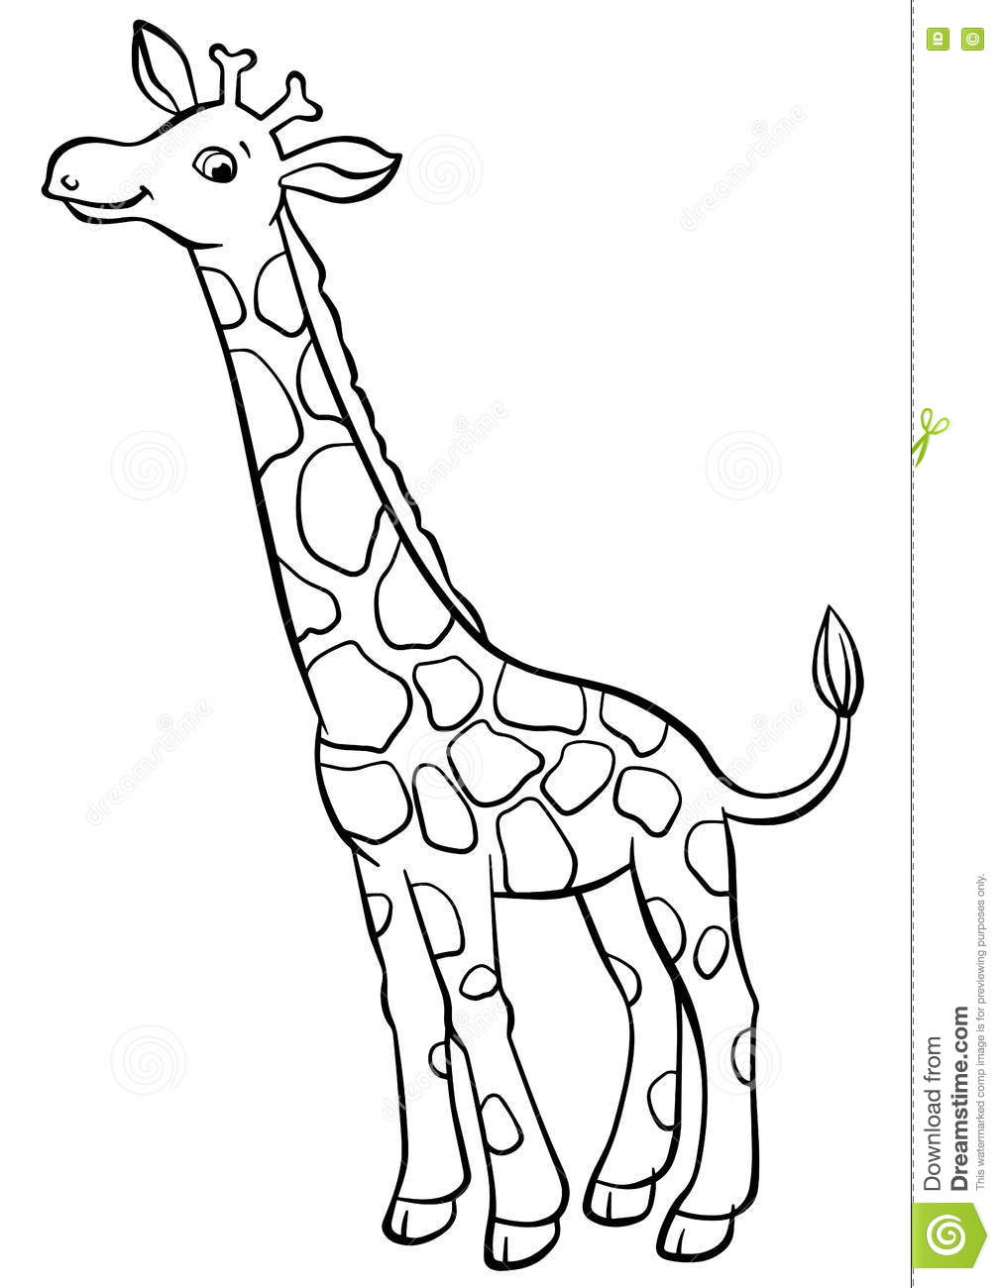 Illustration about coloring pages animals little cute giraffe stands and smiles illustration of câ giraffe coloring pages giraffe colors giraffe illustration